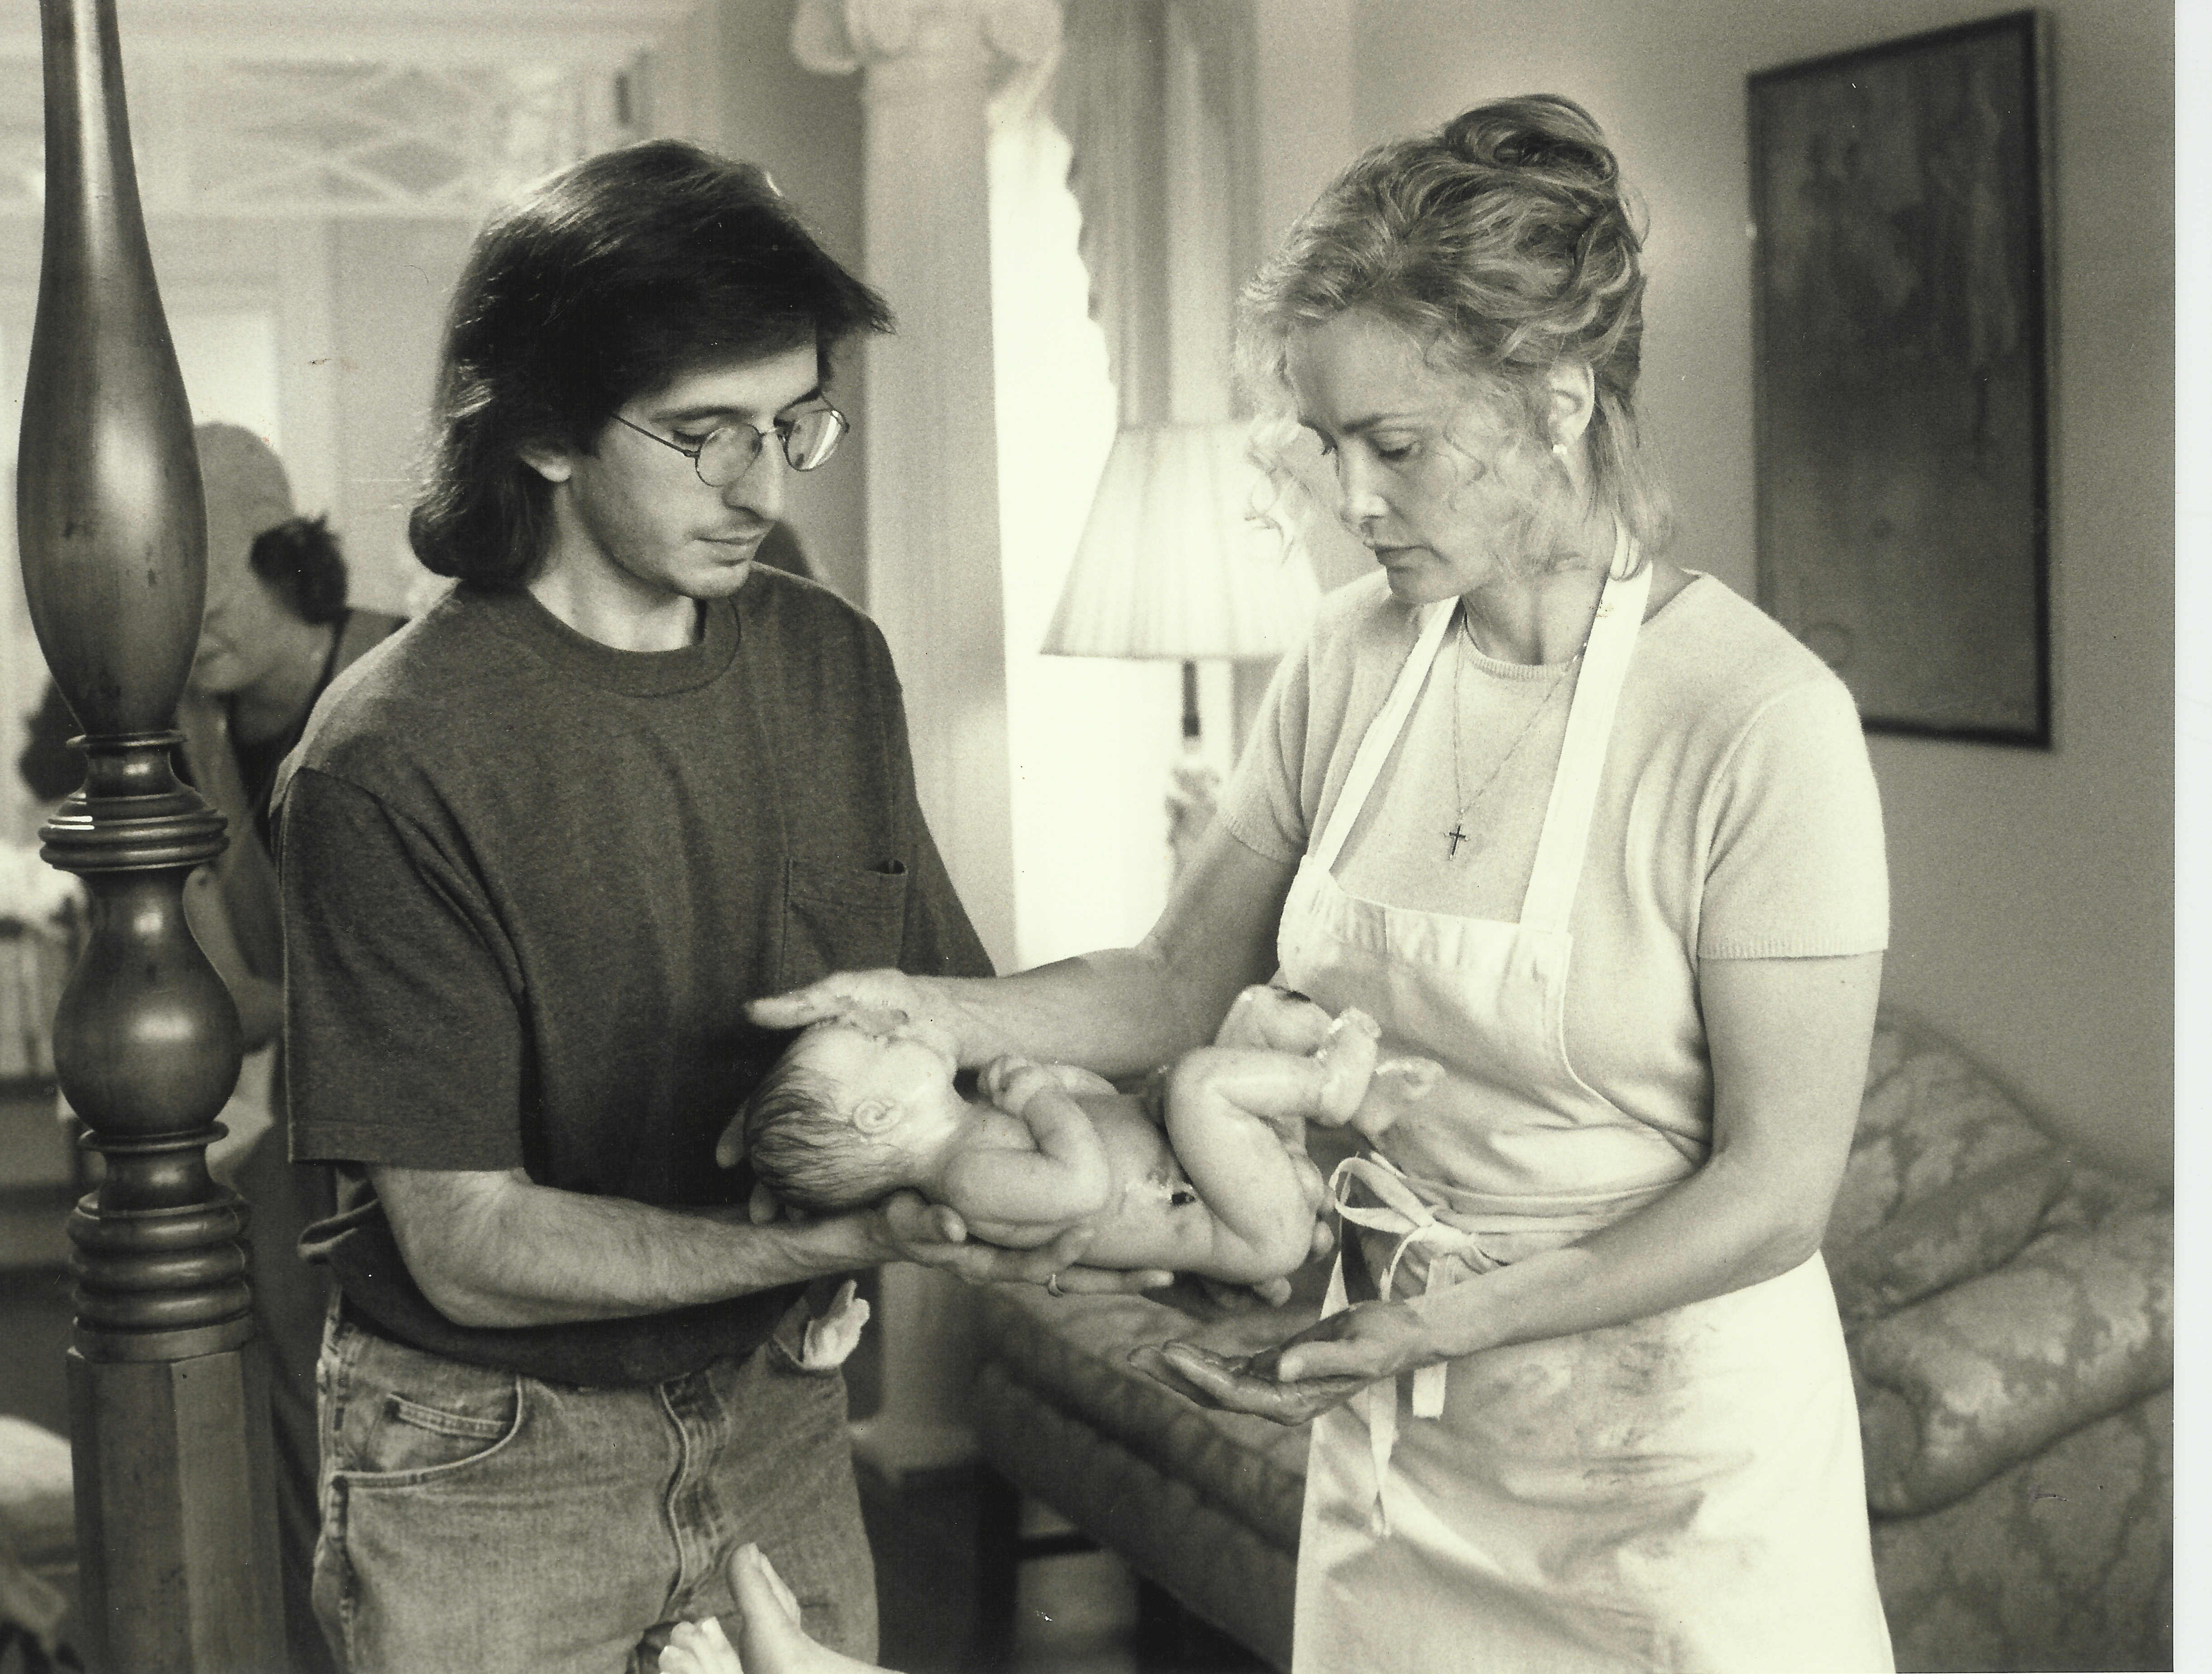 Makeup effects artist Tony Gardner sets up a shot with Alterian's animatronic baby on set with actress Jessica Lange.